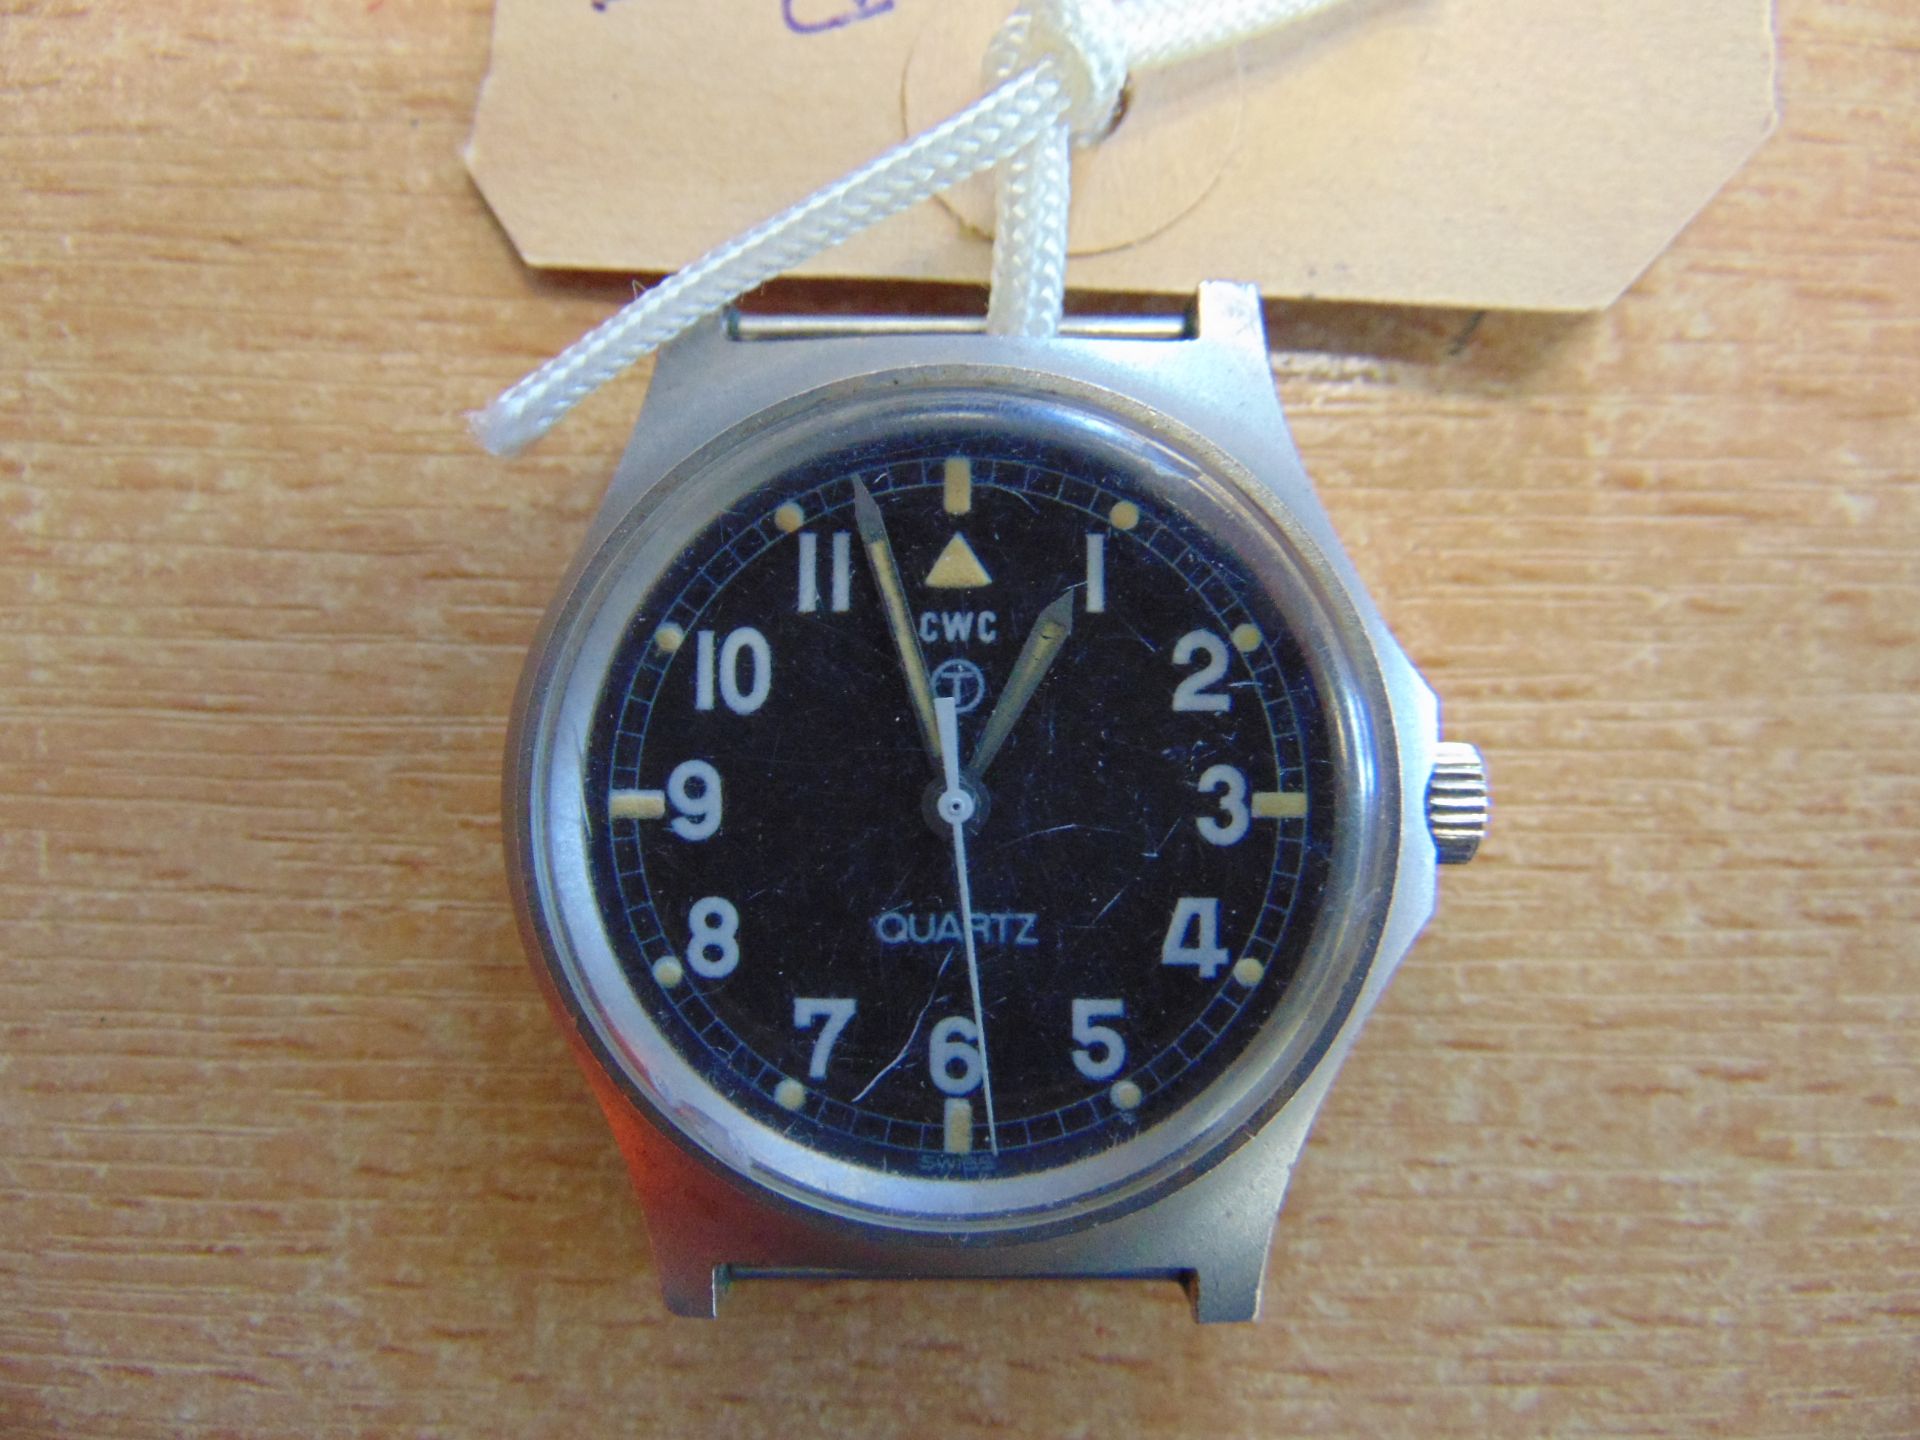 V.Rare CWC Fat Boy British Army G10 Service Watch Nato Marks, Date 1980 - Image 2 of 5